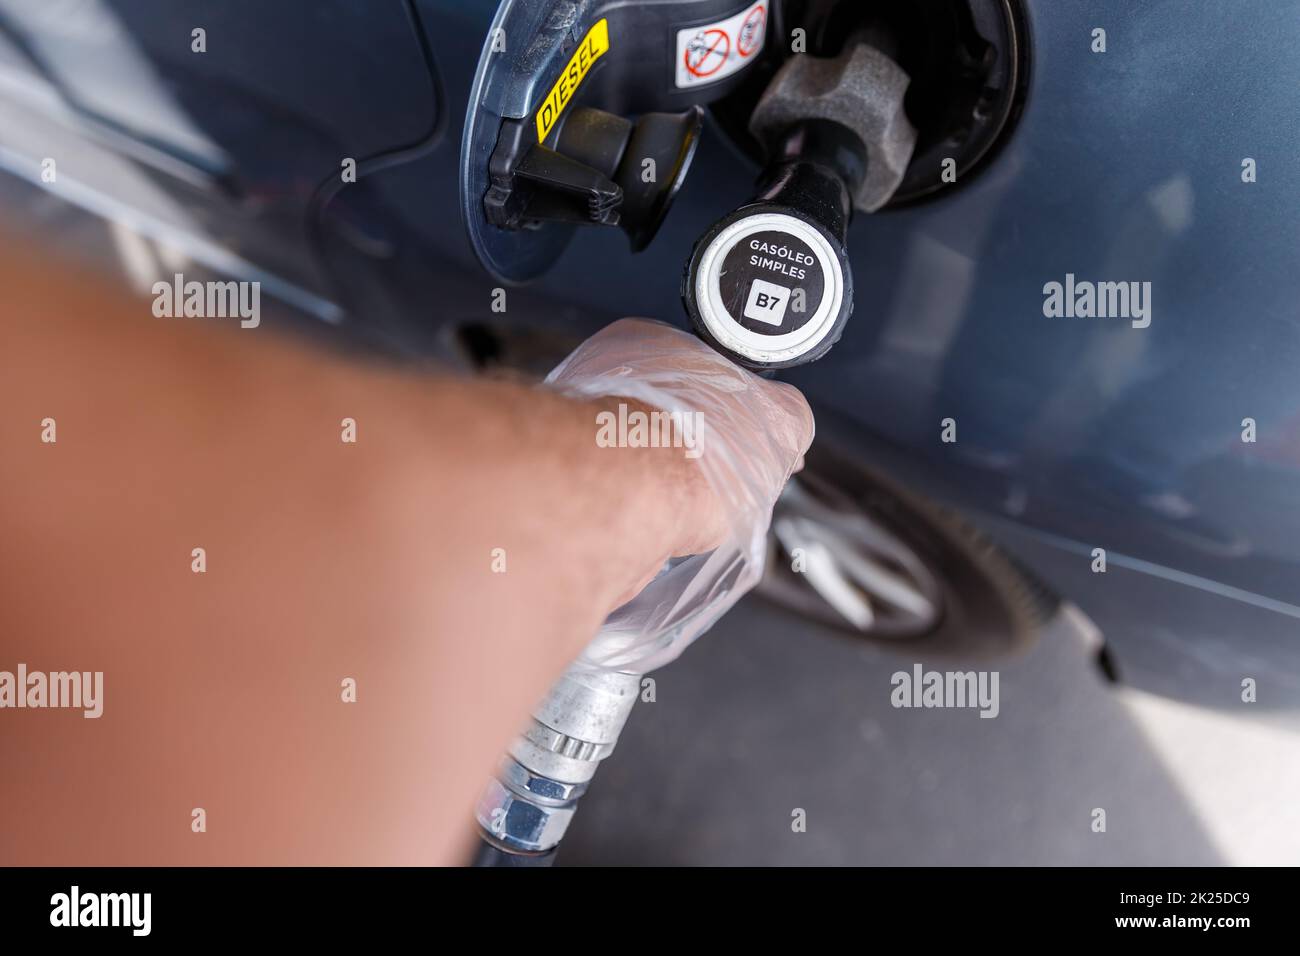 man filling the fuel tank of his car while wearing a plastic glove Stock Photo